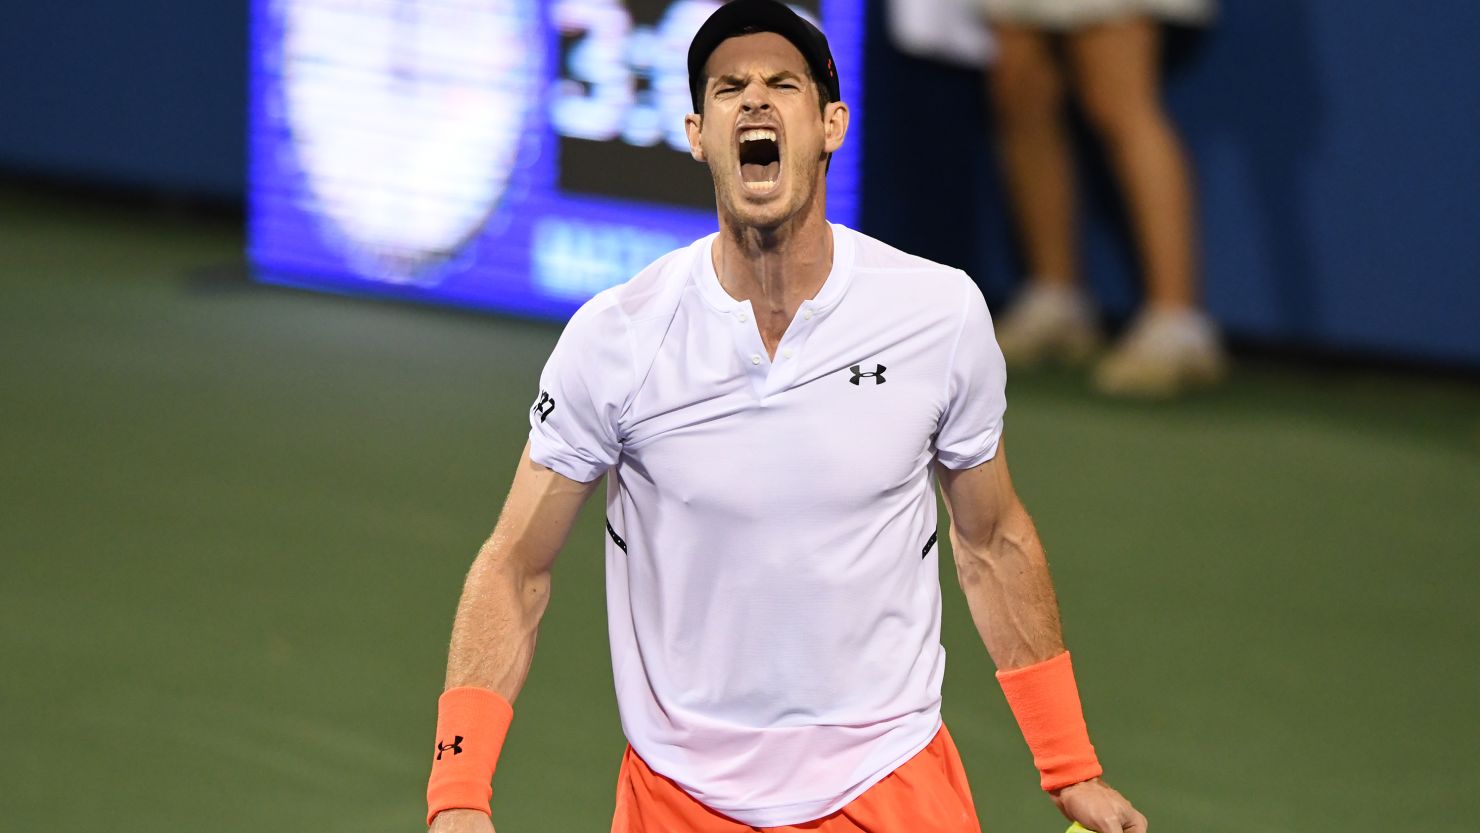 Andy Murray defeated Romanian Marius Copil in three sets at the Citi Open.